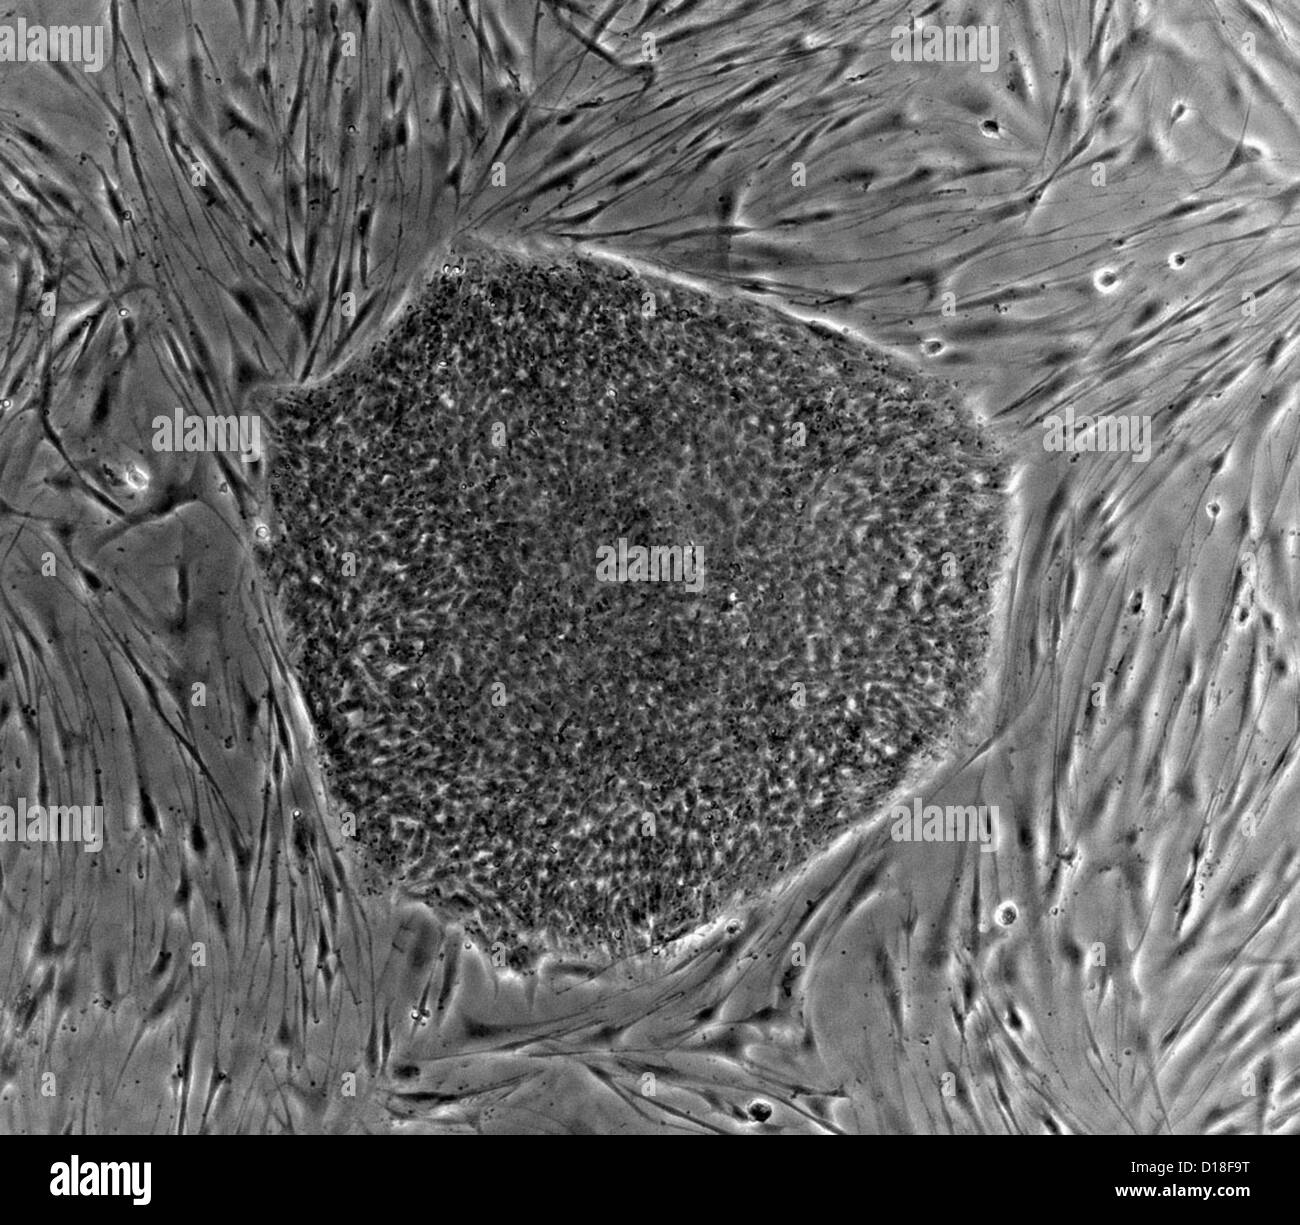 Photomicrograph embryonic stem cells Stock Photo